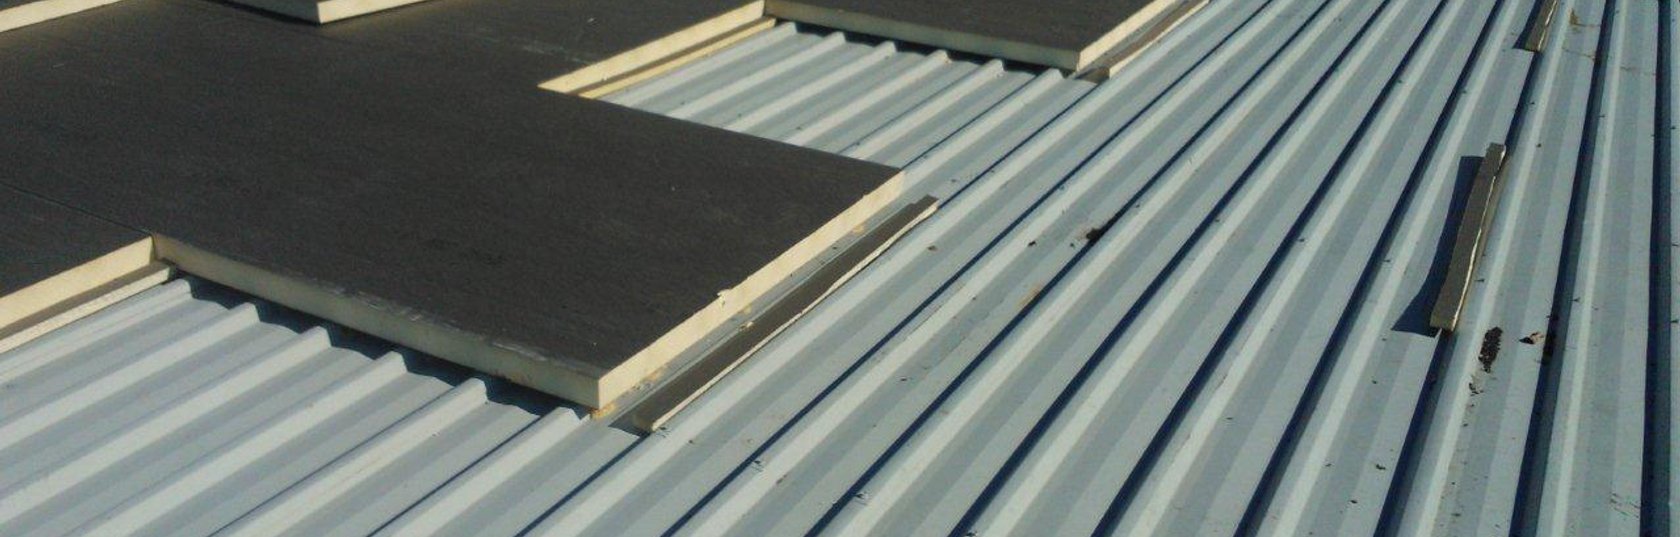 Re-roofing: Knowing Your Options